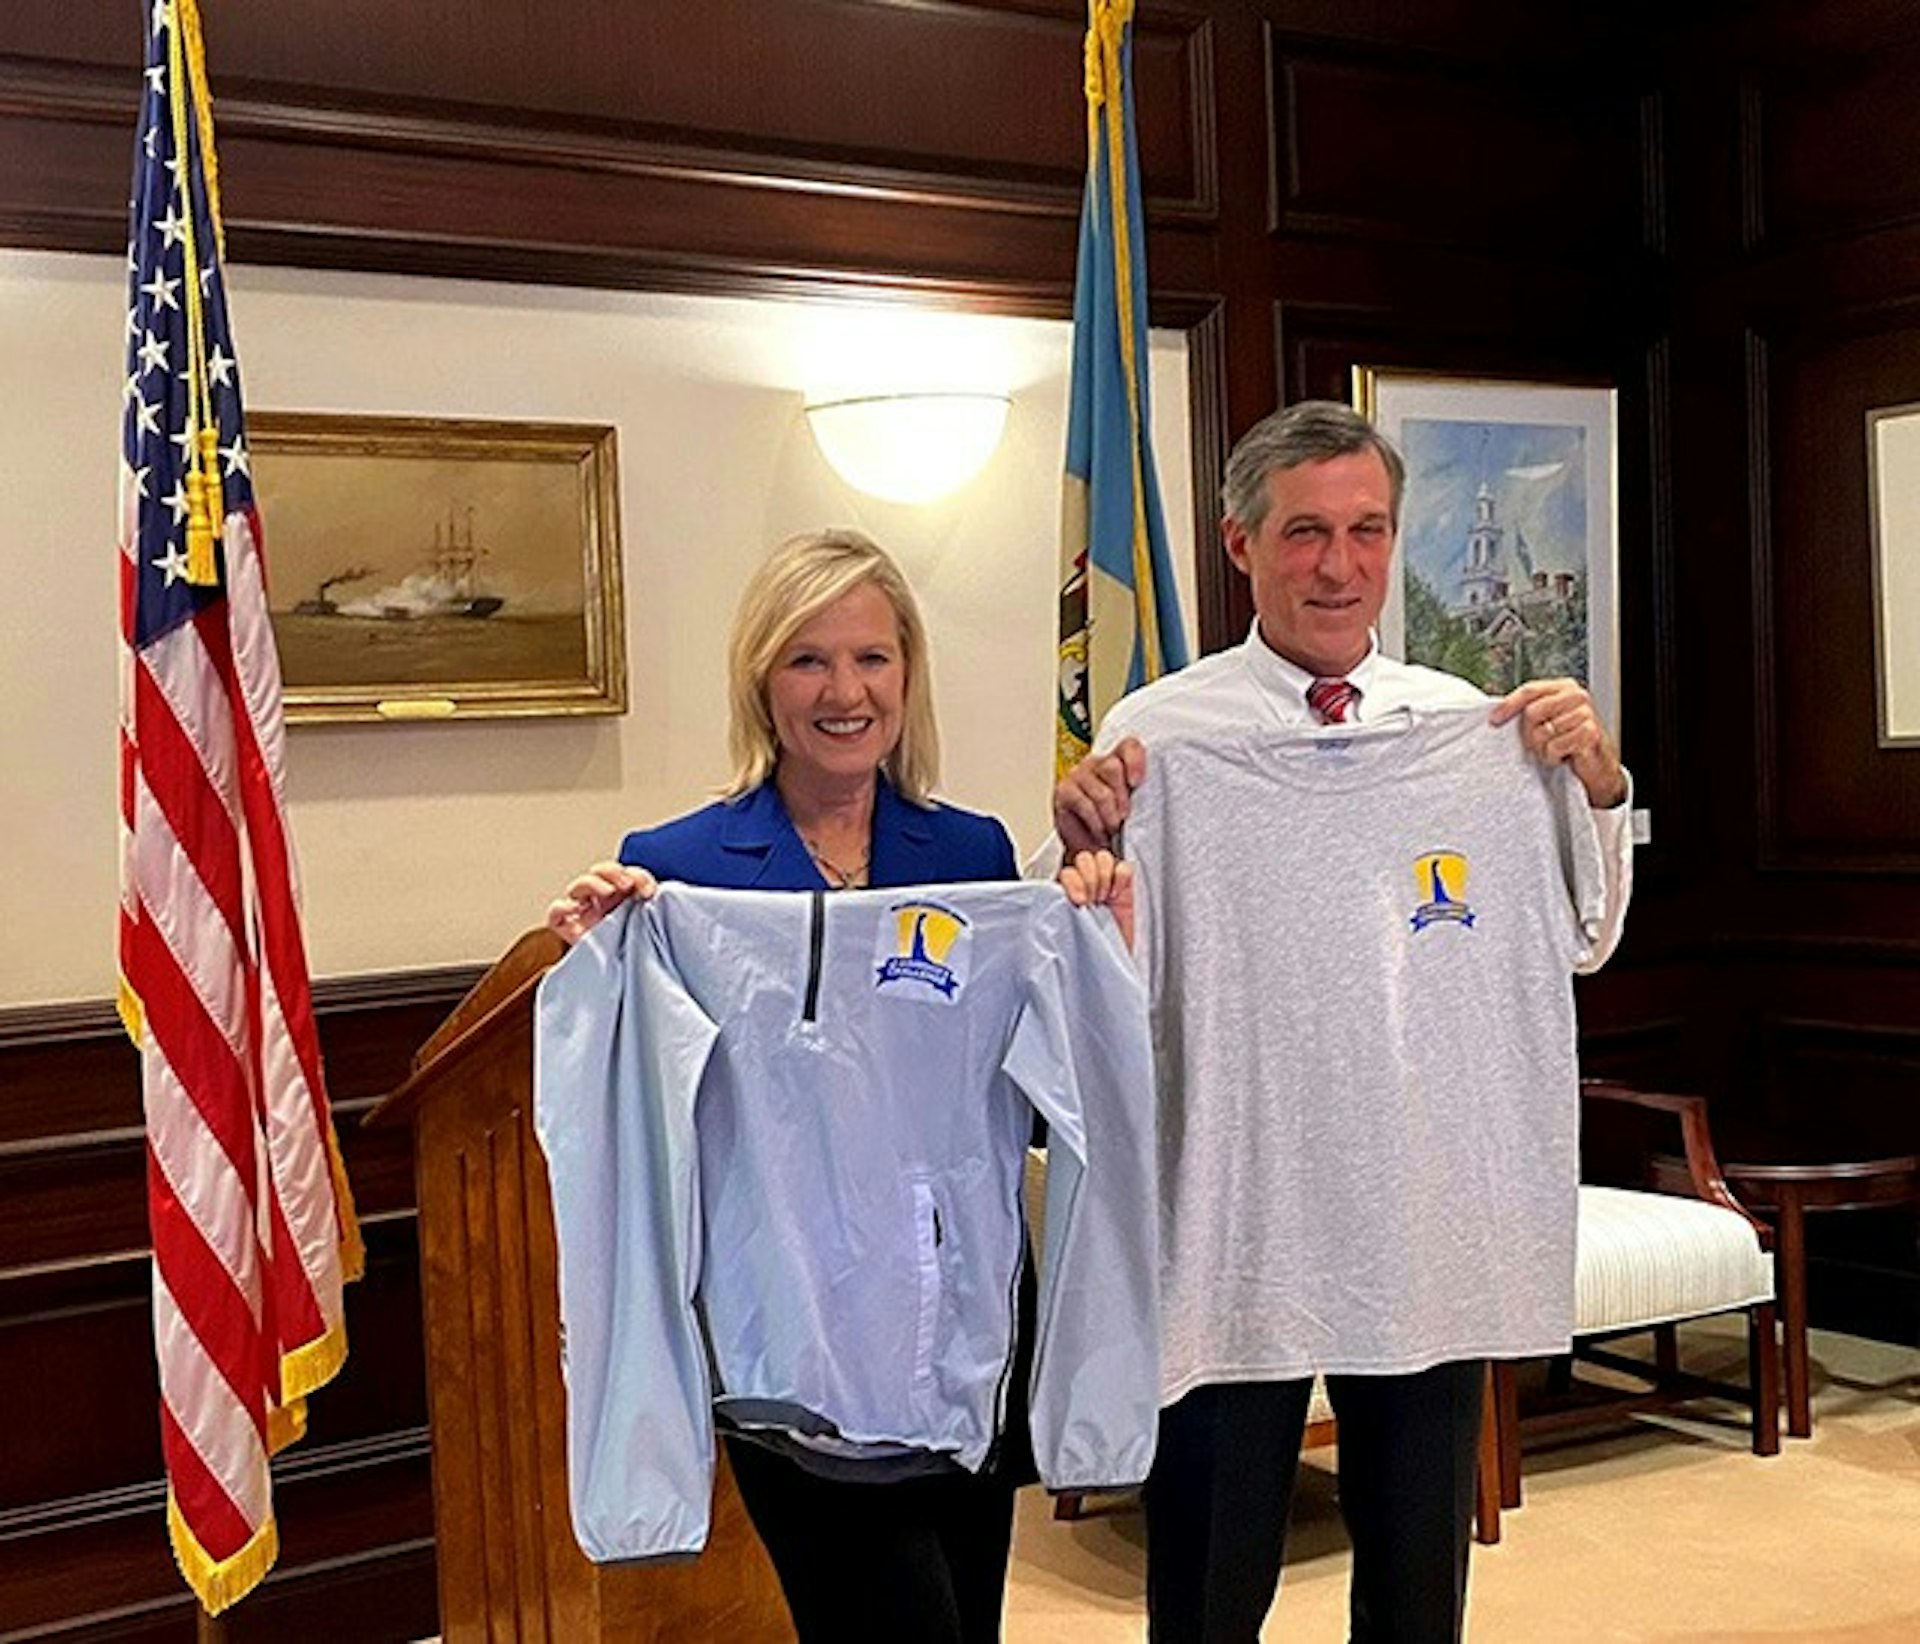 Lt. Governor Dr. Bethany Hall-Long and Governor John Carney promote the 2020 Lt. Governor’s Challenge